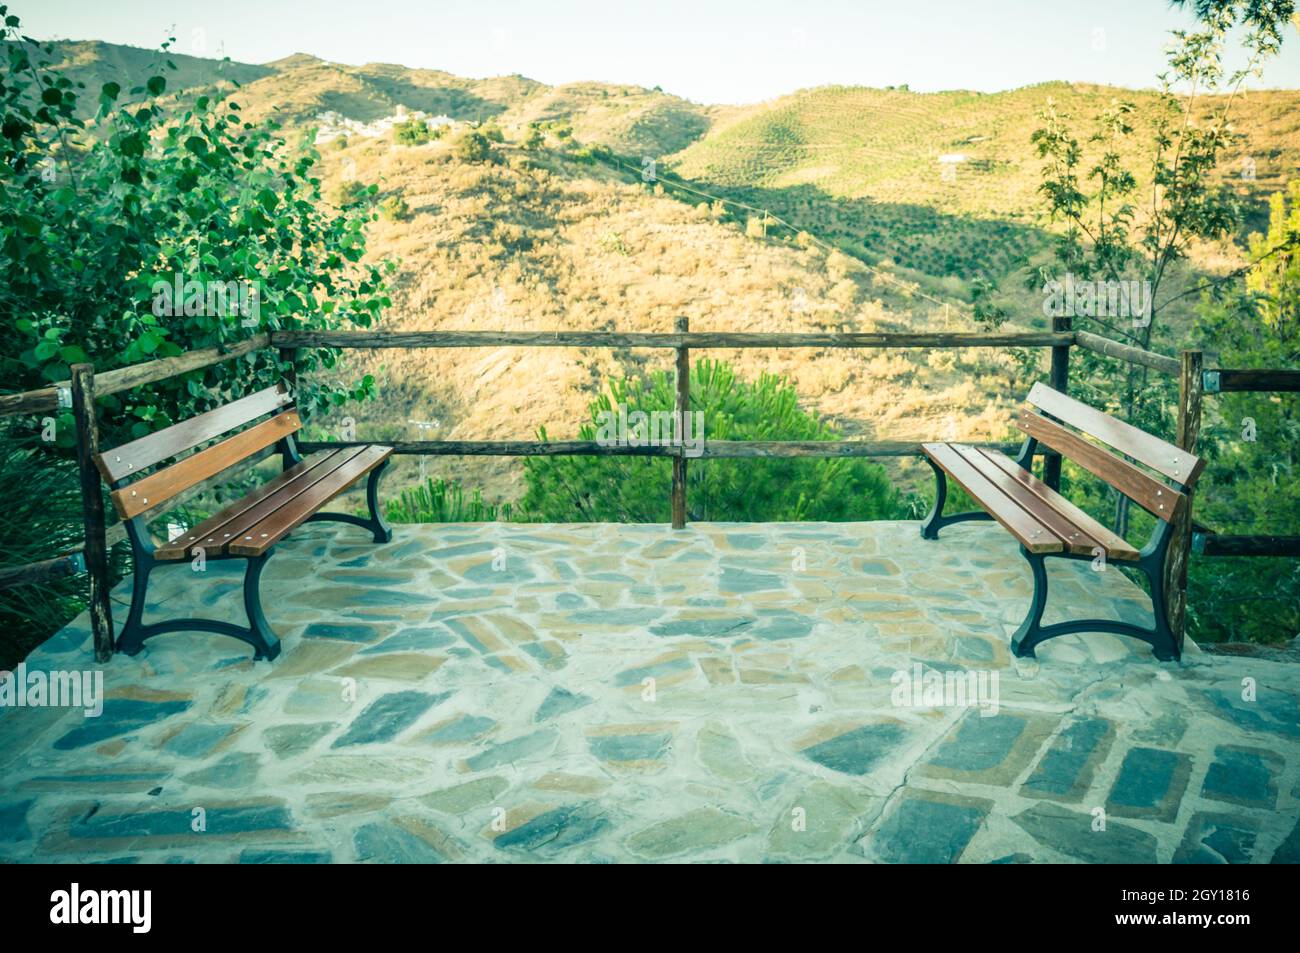 Benches facing each other on the viewpoint in Macharaviayain, Malaga, Spain Stock Photo